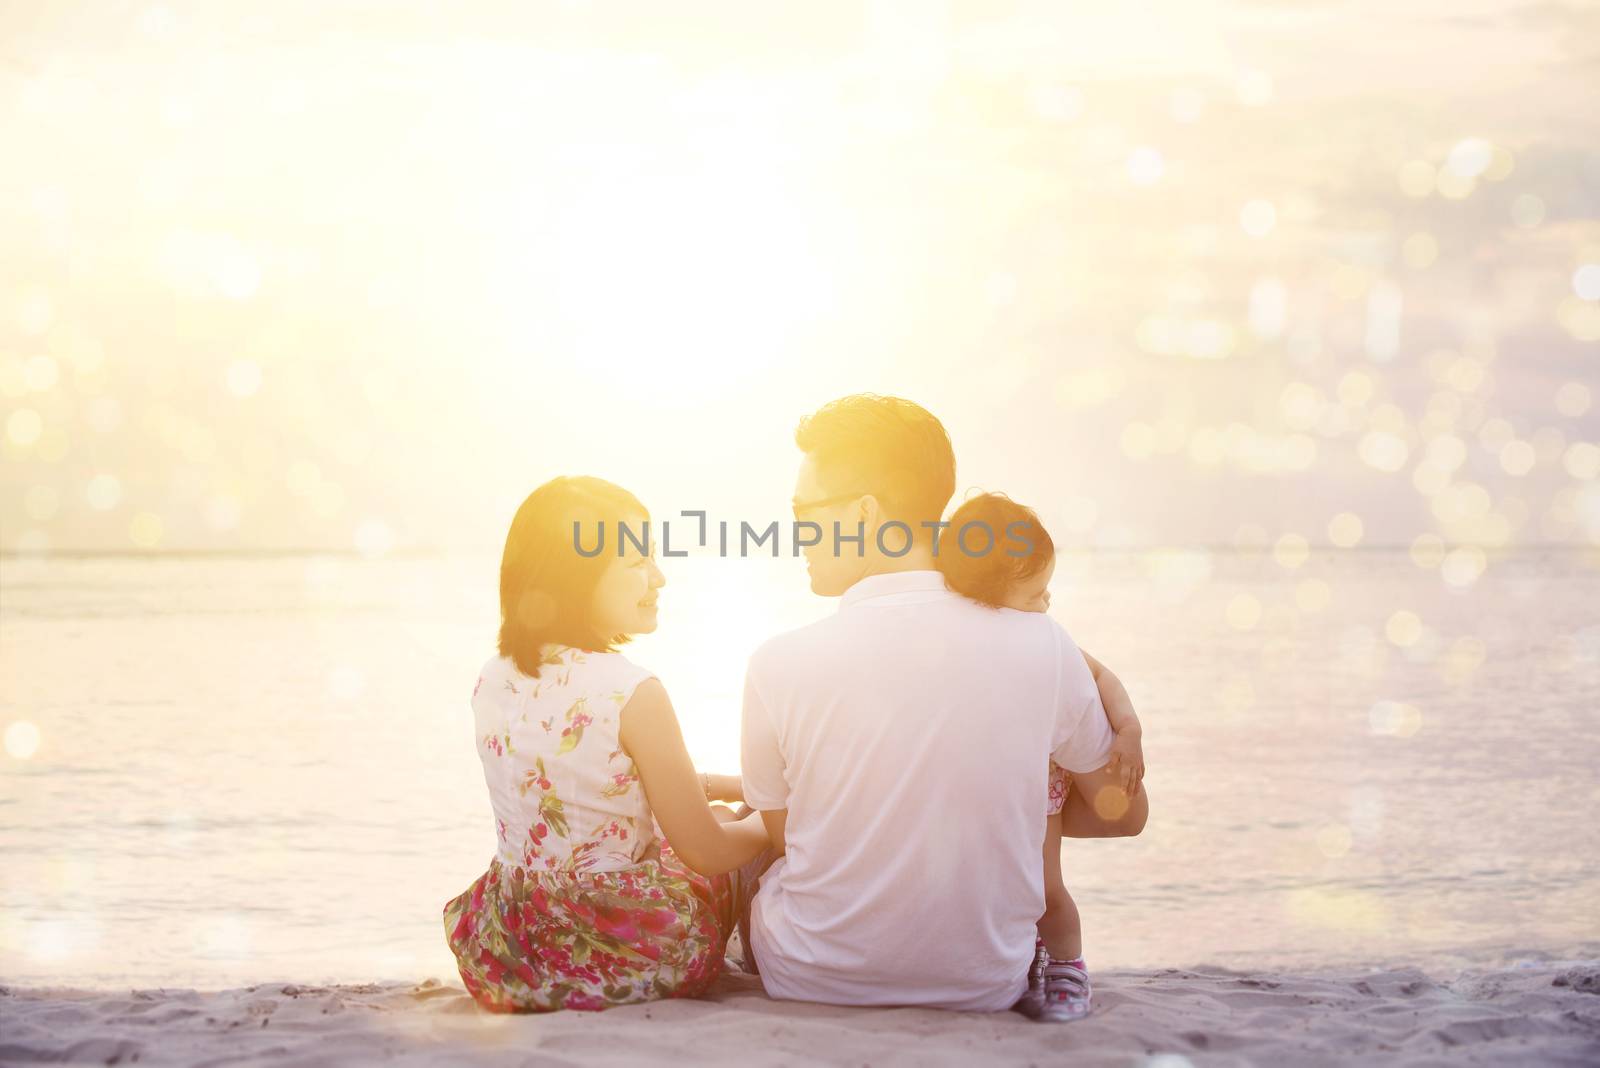 Rear view of family enjoying outdoor activity together, sitting on beach sand in beautiful sunset during holiday vacations.